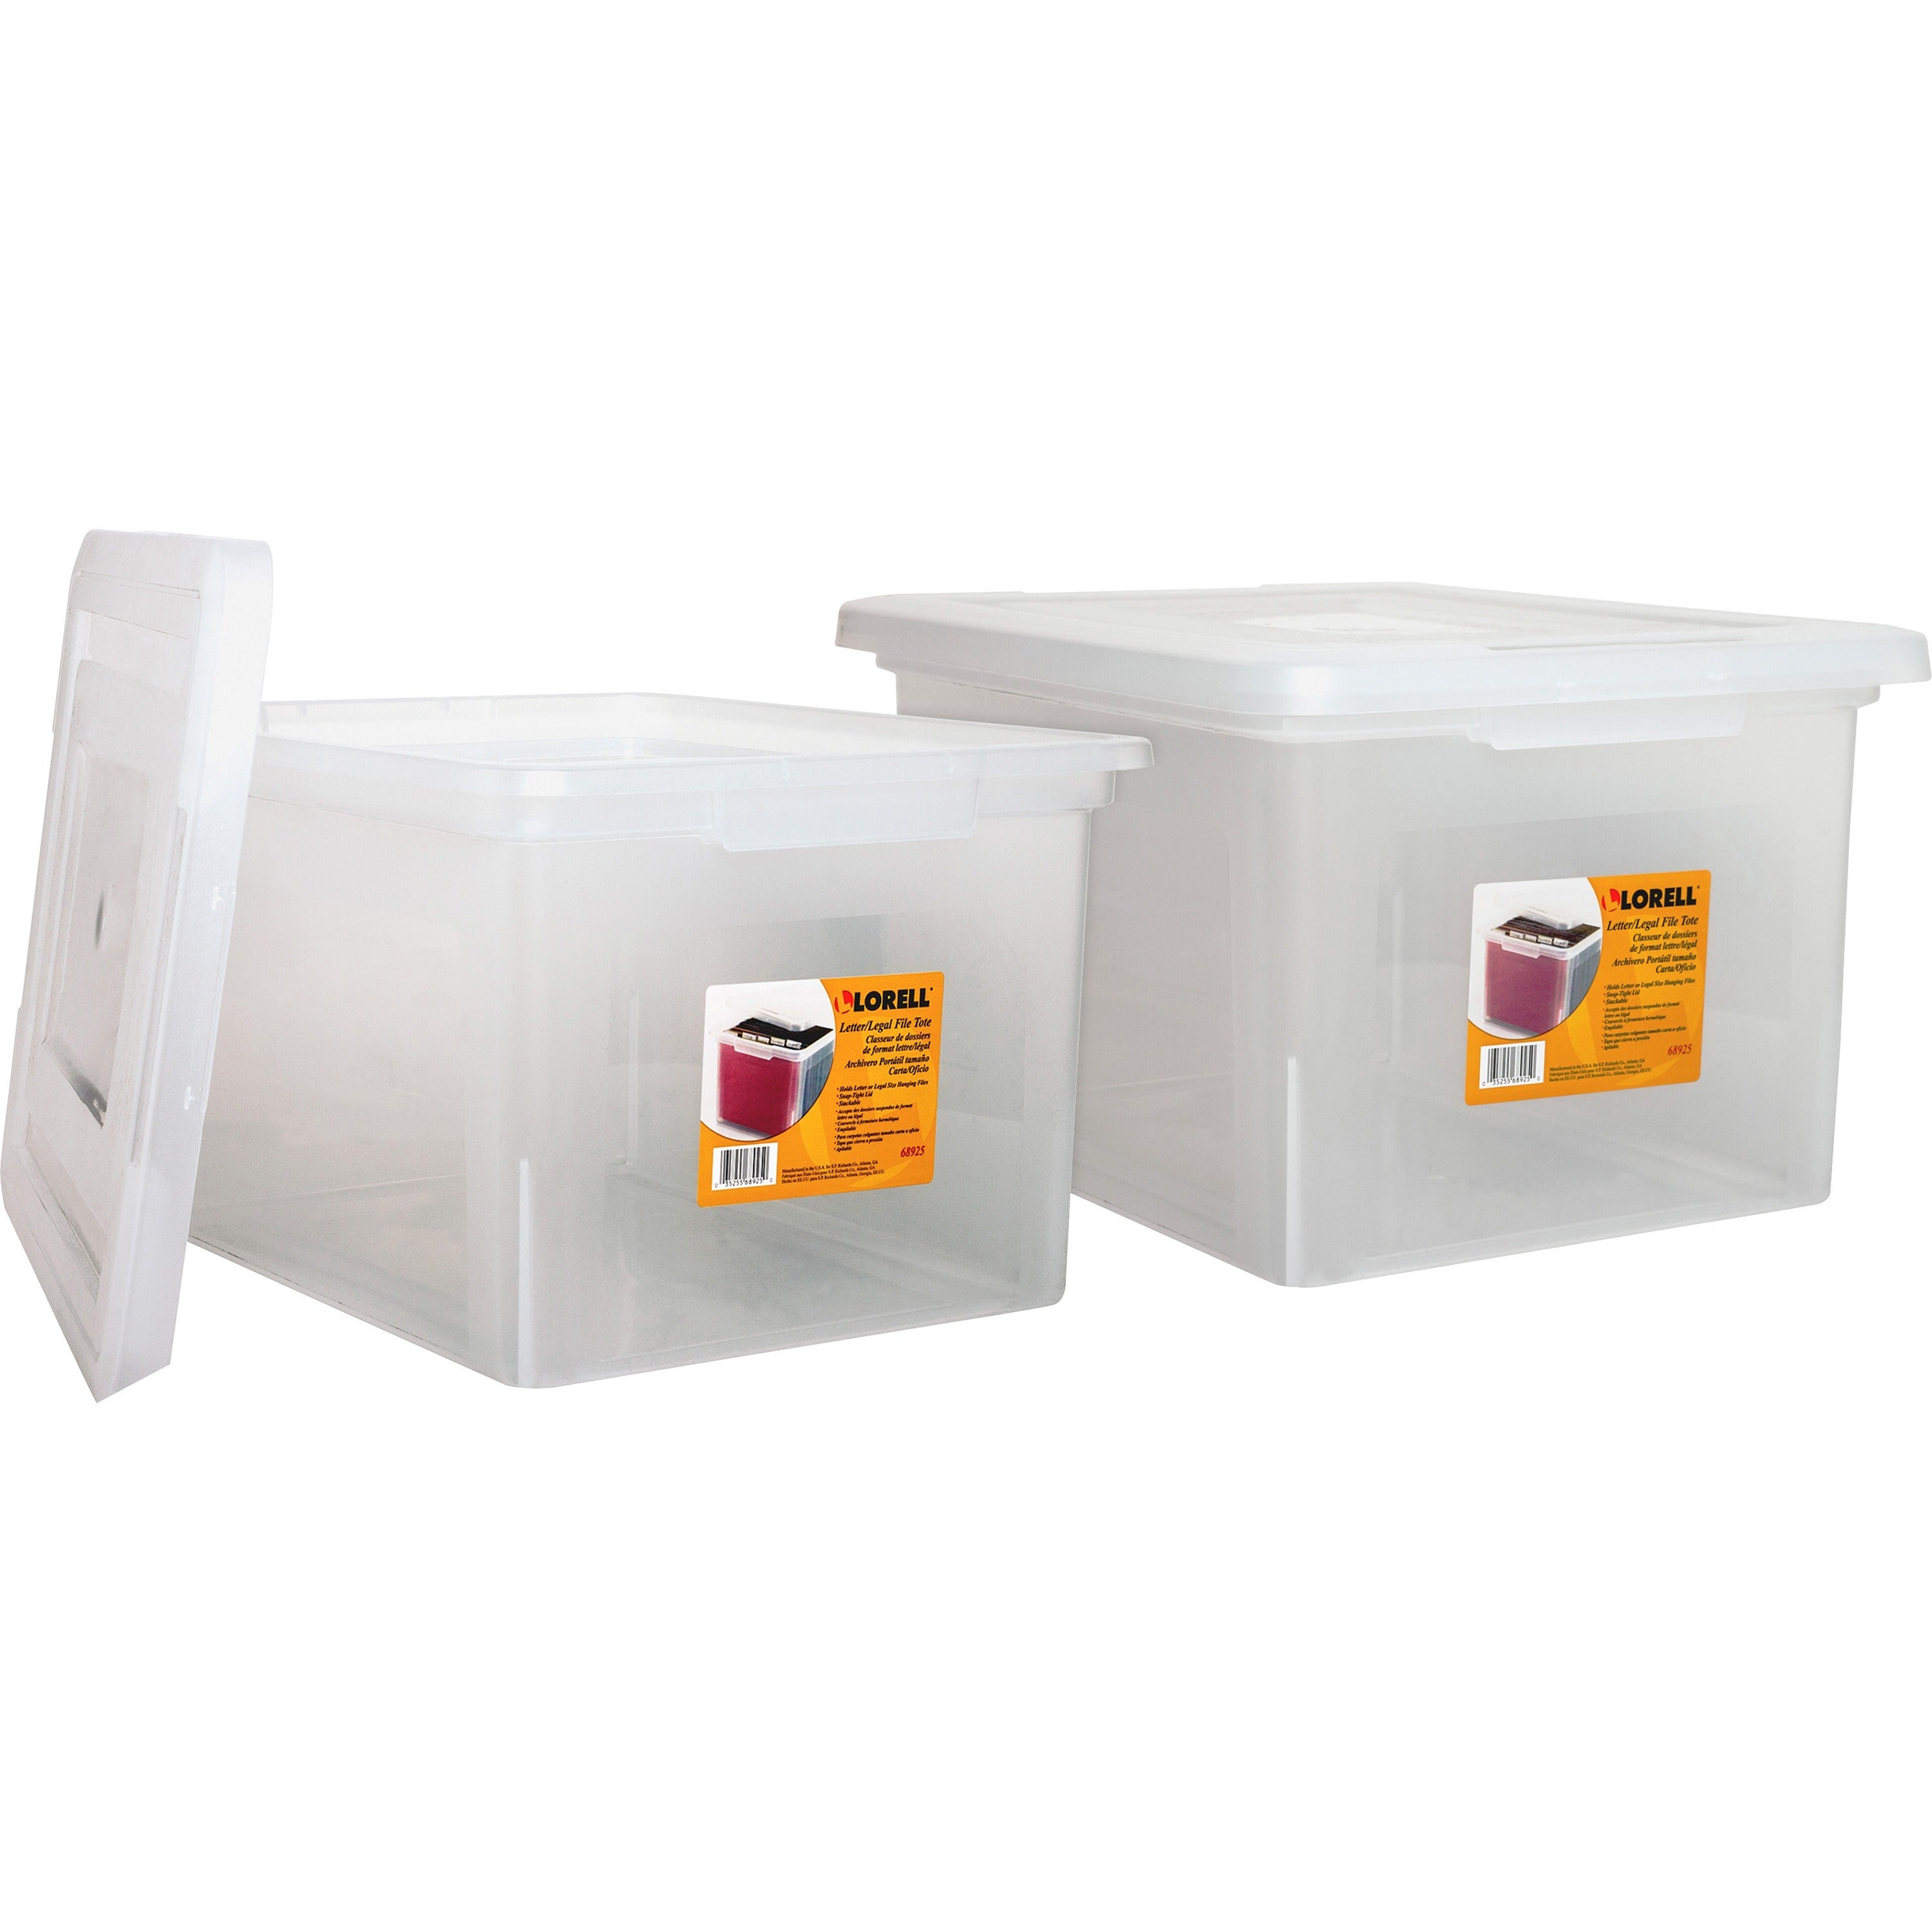 lorell-stacking-file-boxes-external-dimensions-142-width-x-18-depth-x-108height-media-size-supported-letter-legal-interlocking-closure-stackable-plastic-clear-for-file-2-bundle_llr68925bd - 1